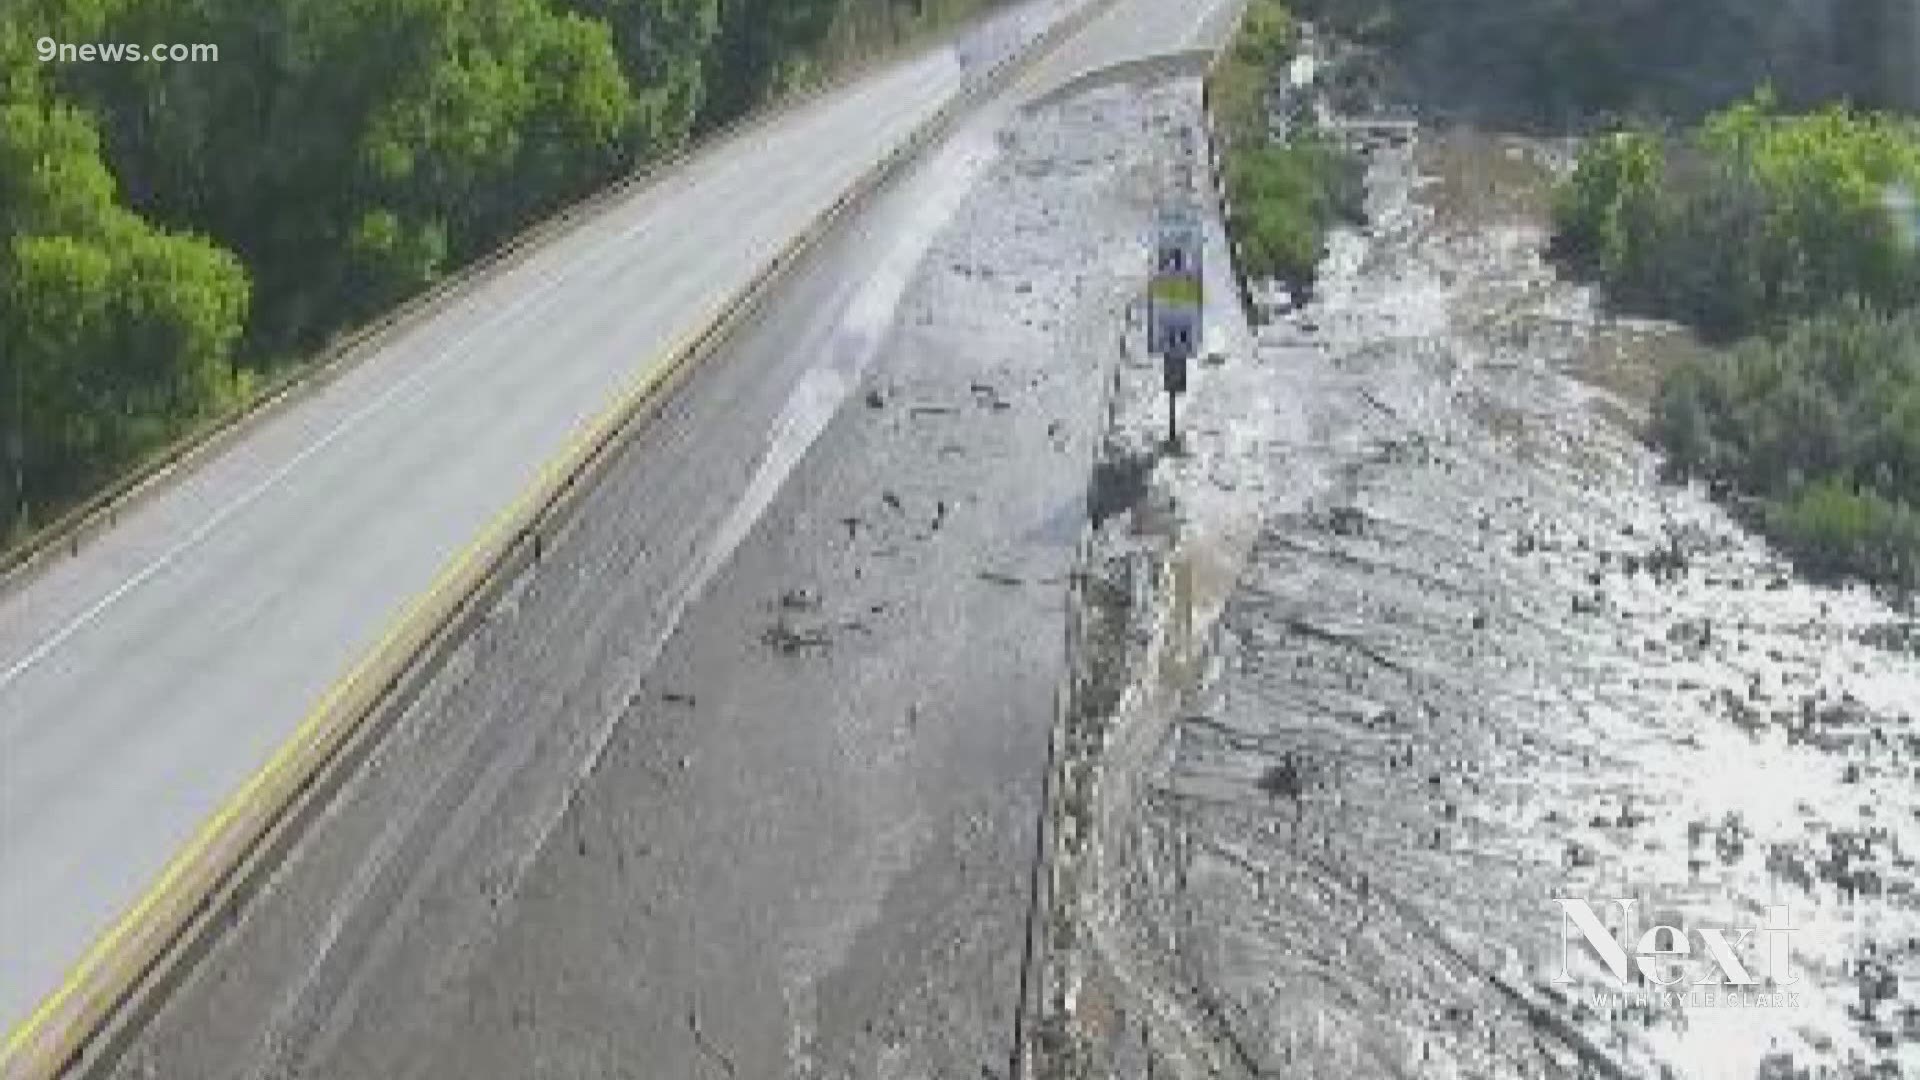 I-70 has been closed seven times in the last three weeks because of mudslides and flash flood warnings in this part of Colorado.